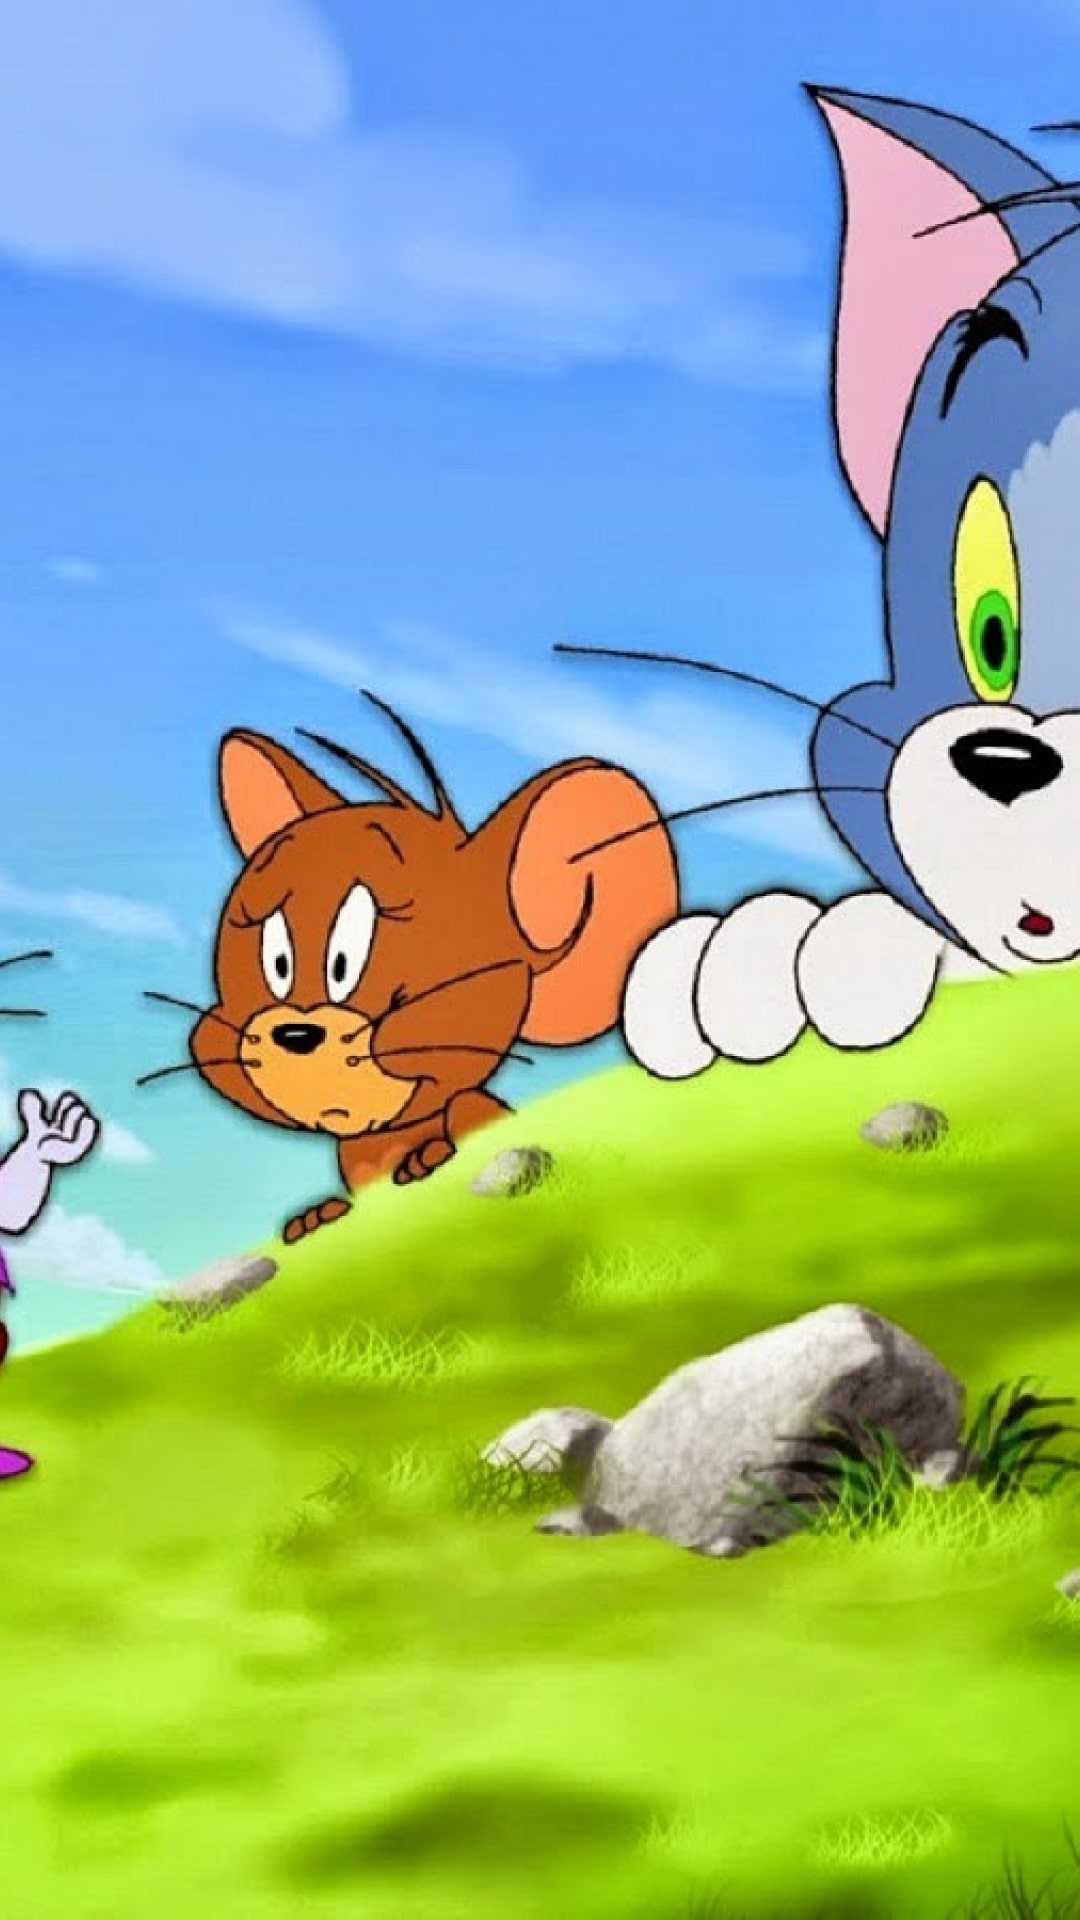 712936 Tom and Jerry  Rare Gallery HD Wallpapers